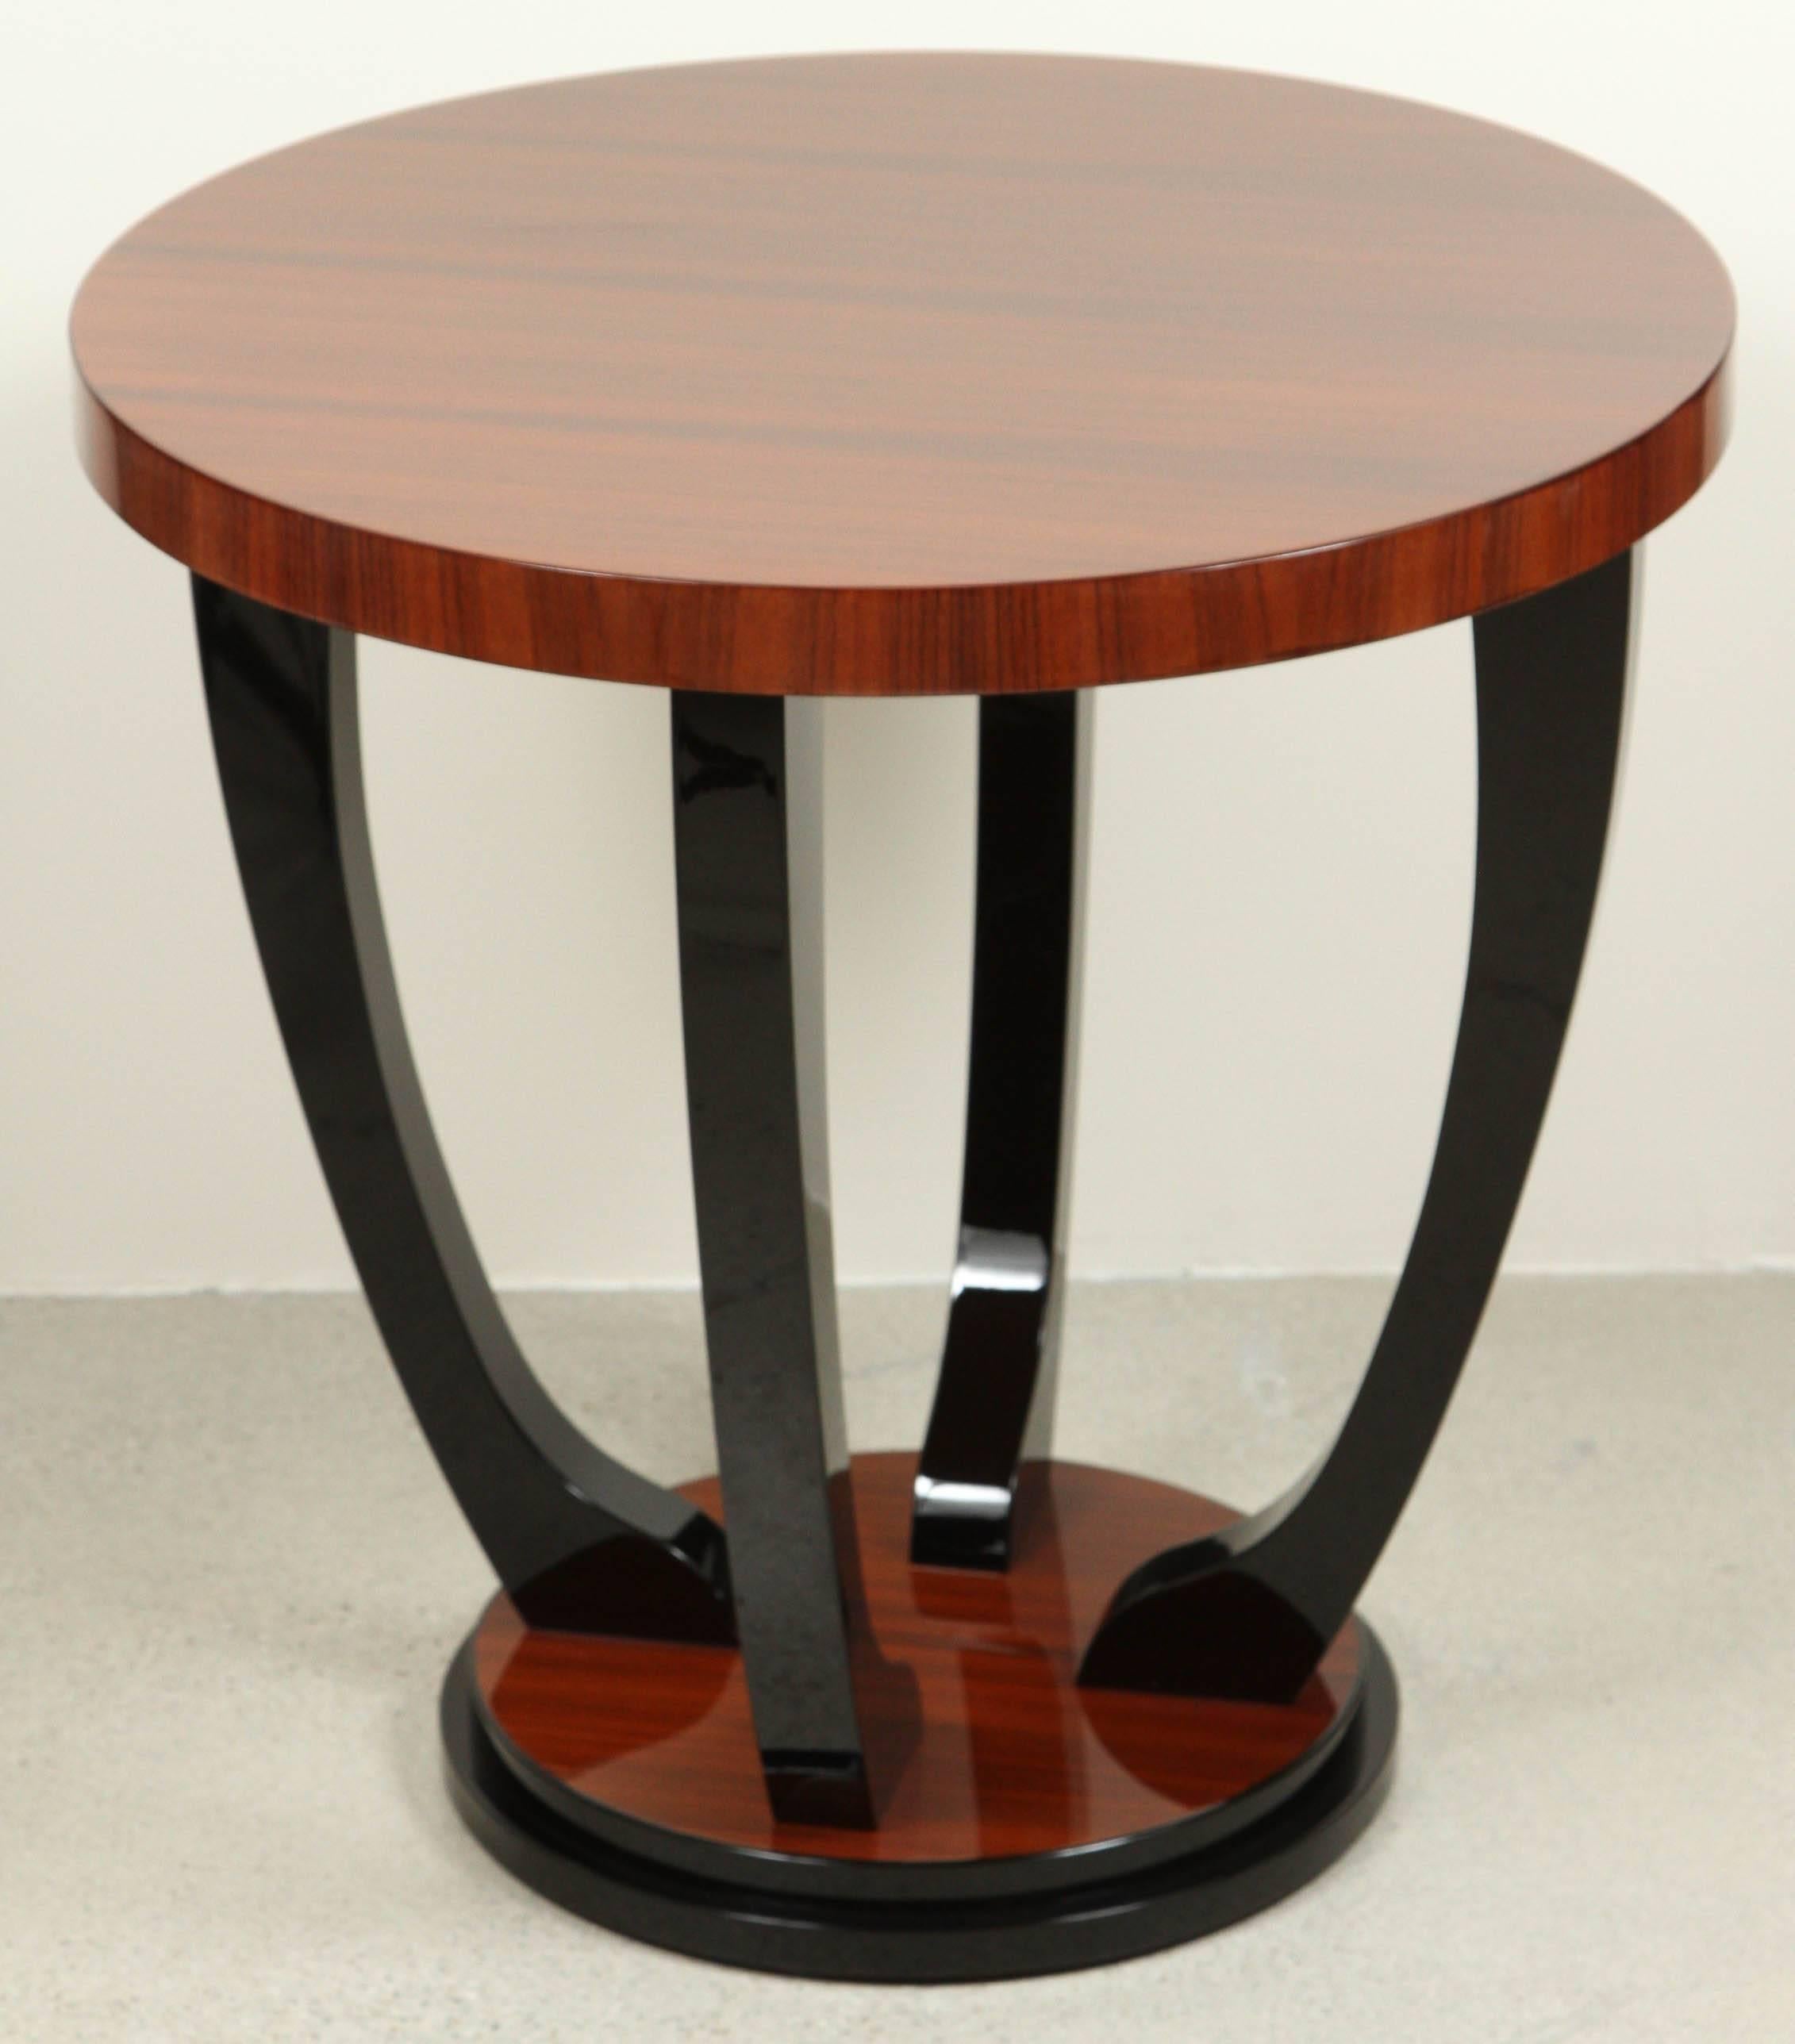 Art deco style side table made of fine rosewood and black lacquer accents by German Fine furniture maker Cygal art deco.
A clean and decorative table, this piece has become one of our classics.
Other finishes available.